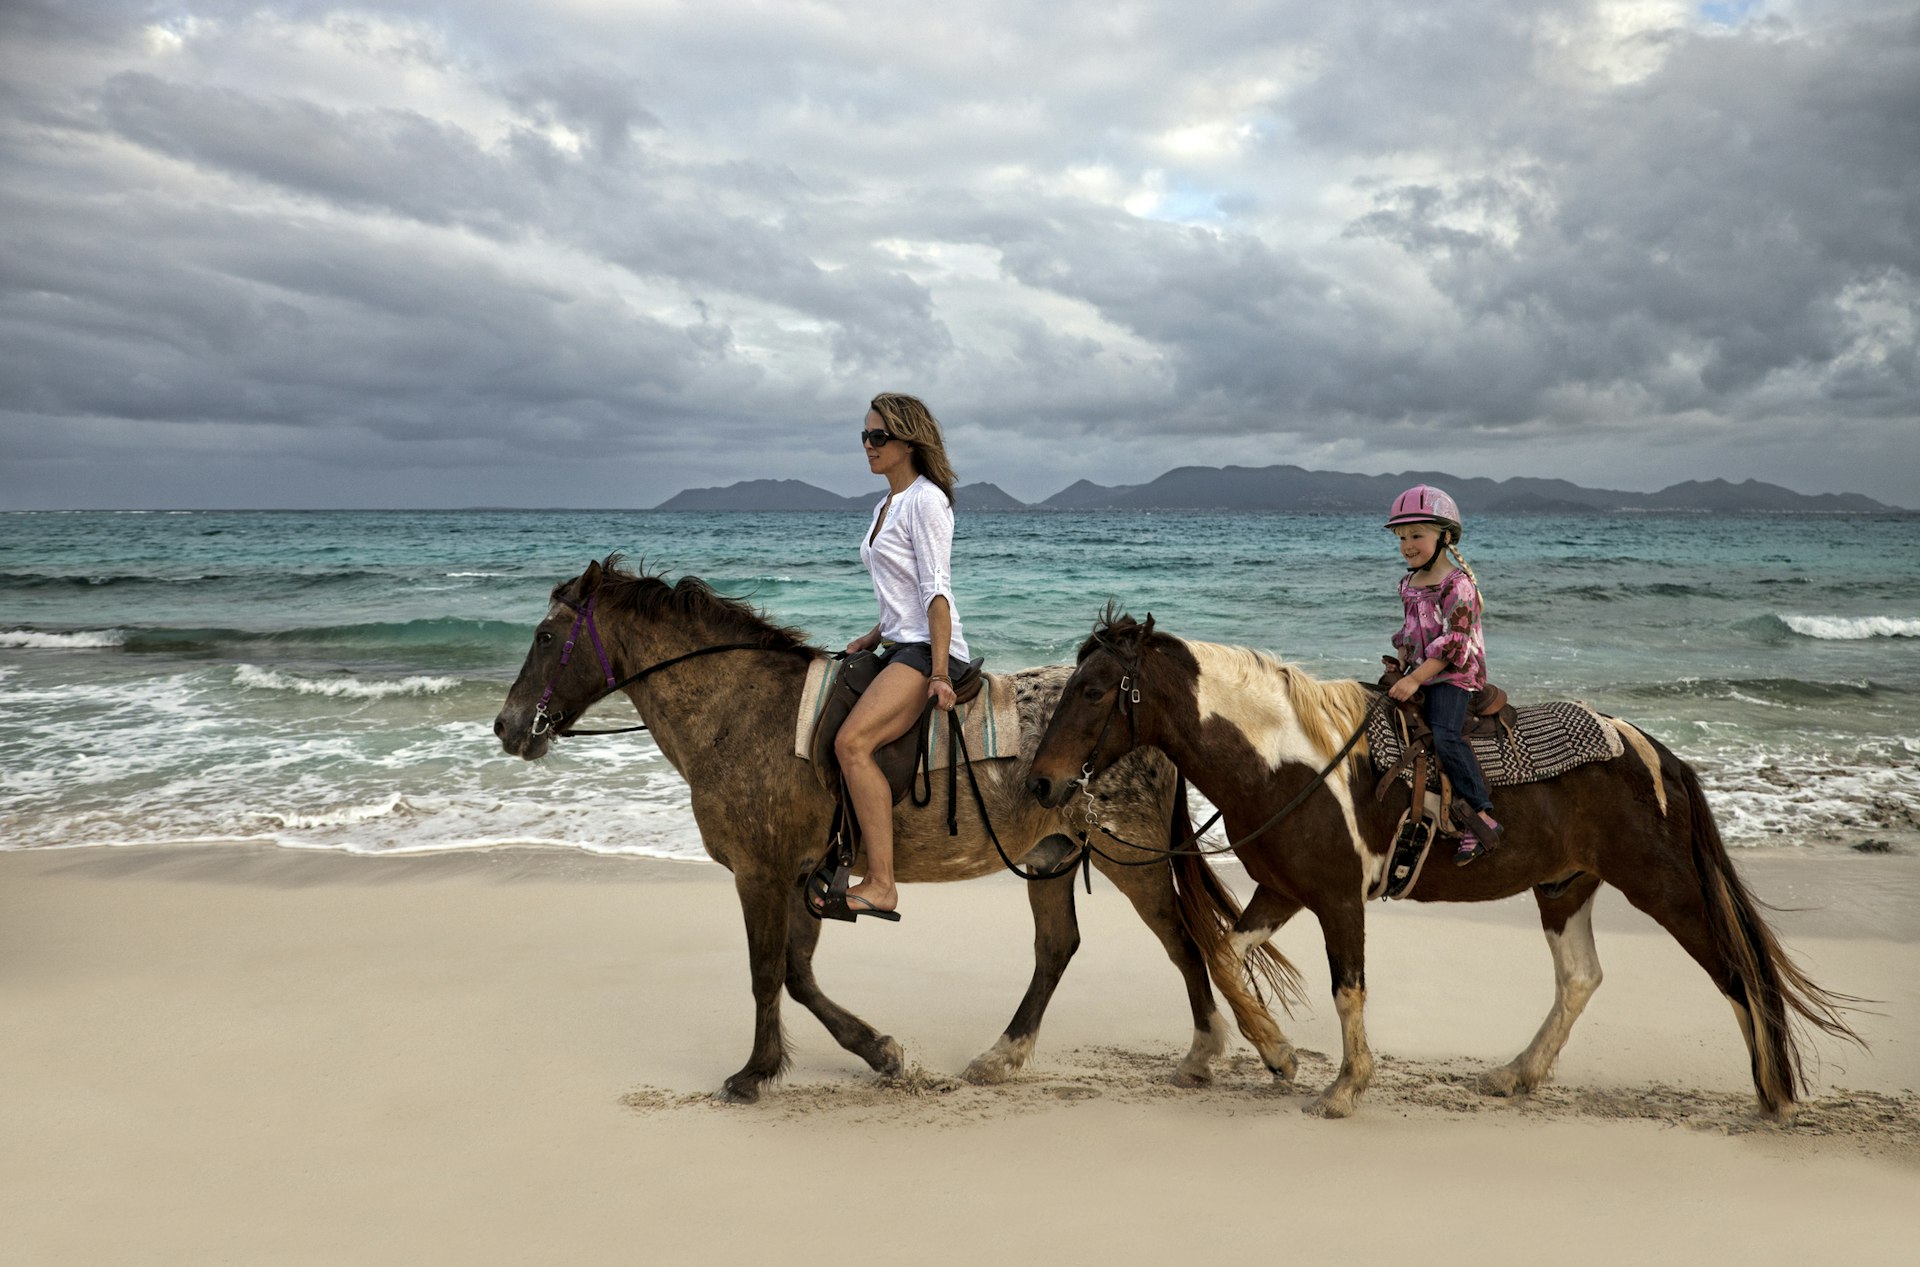 Mother and daughter riding horses on a beach in Anguilla